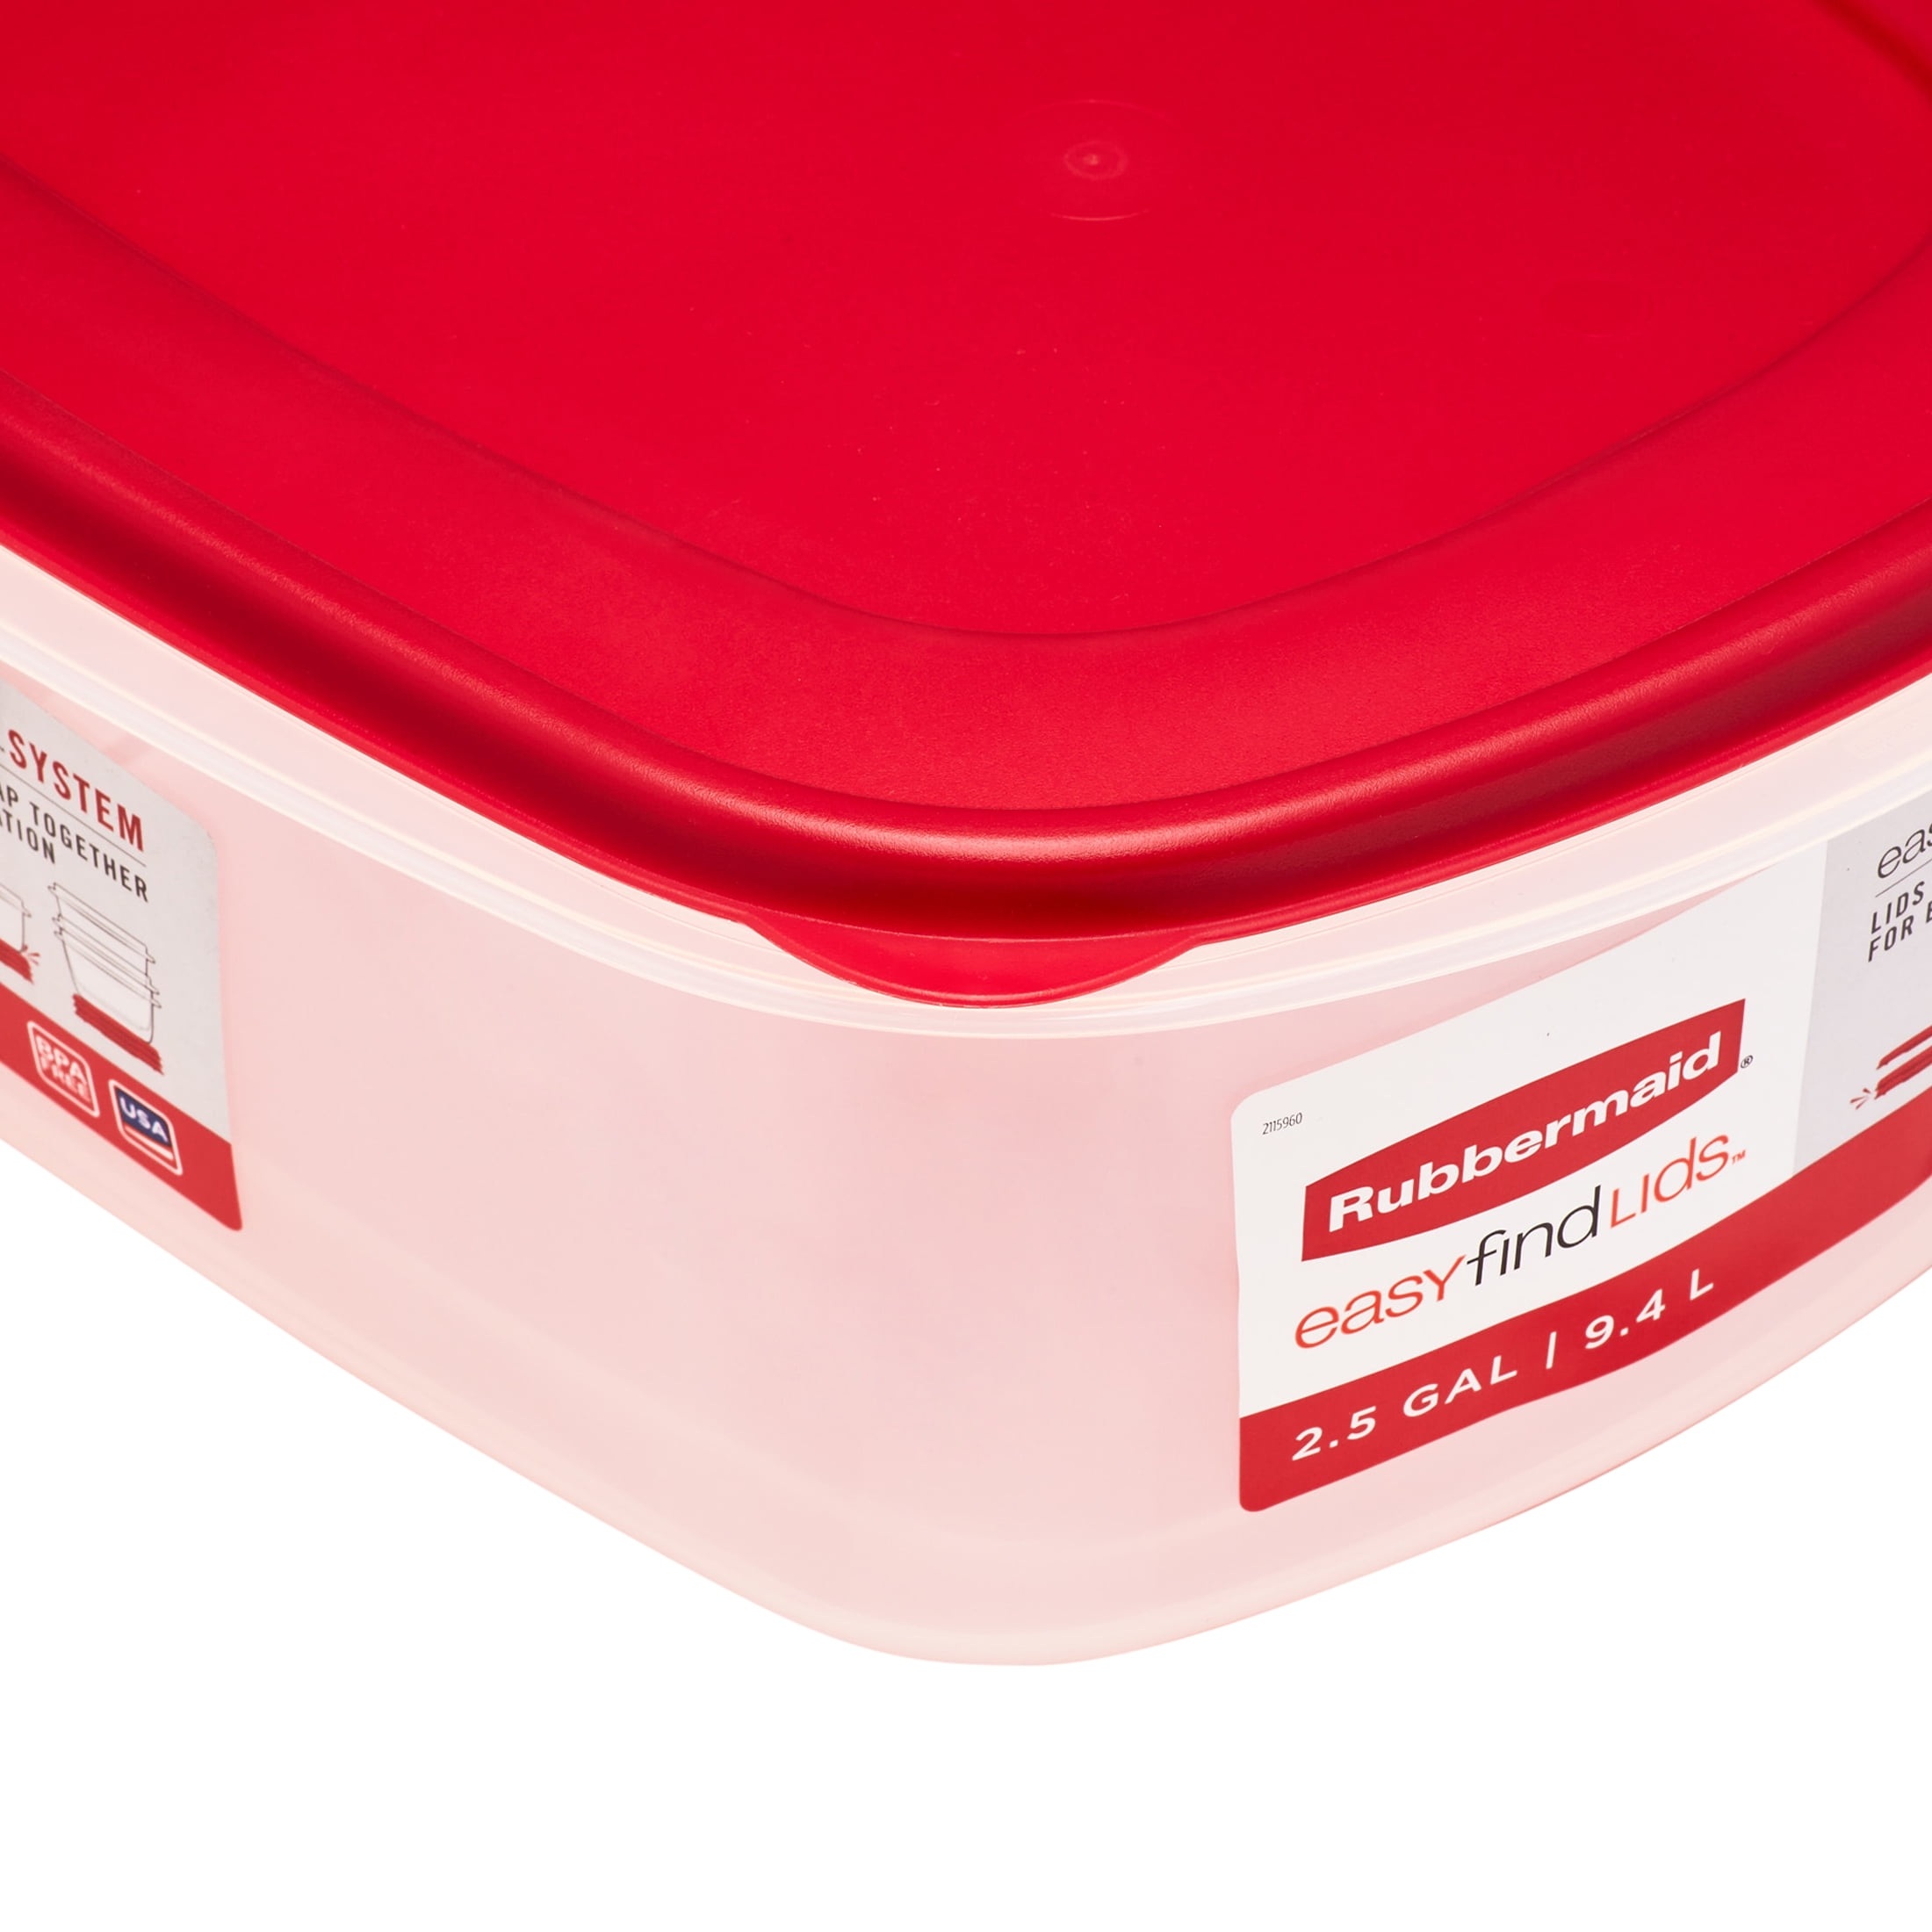 Rubbermaid Easy Find Lids 2.5 Gal. Clear Rectangle Food Storage Container -  Parker's Building Supply